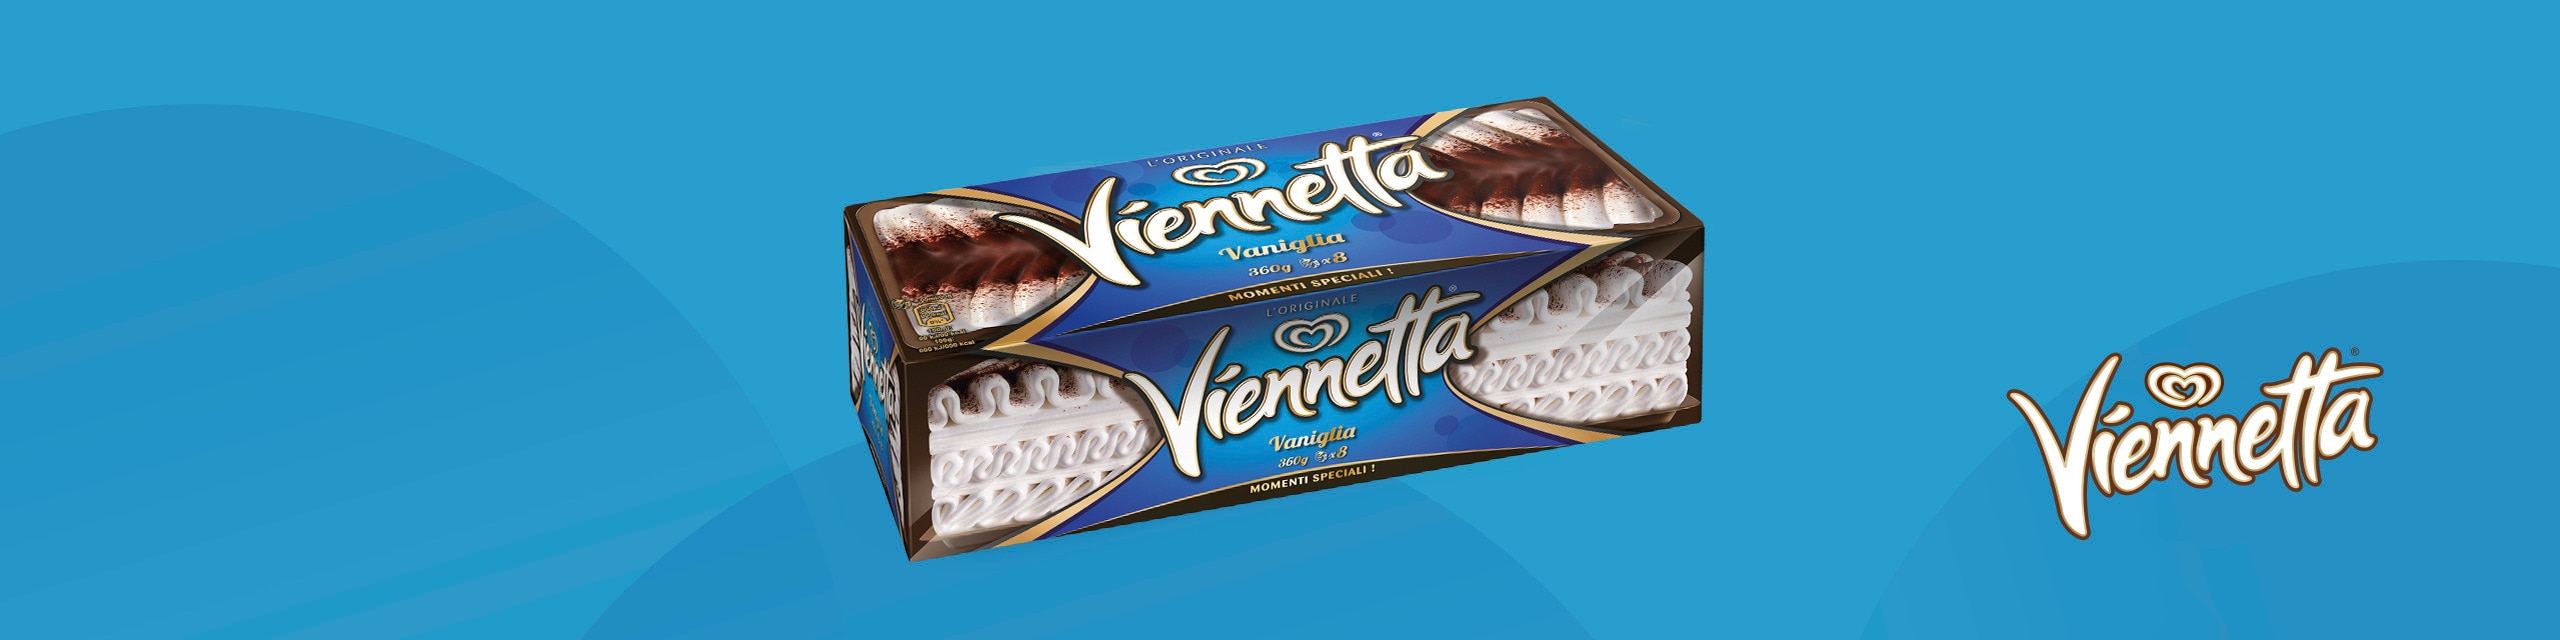 A Vienetta Packshot in front of a blue background